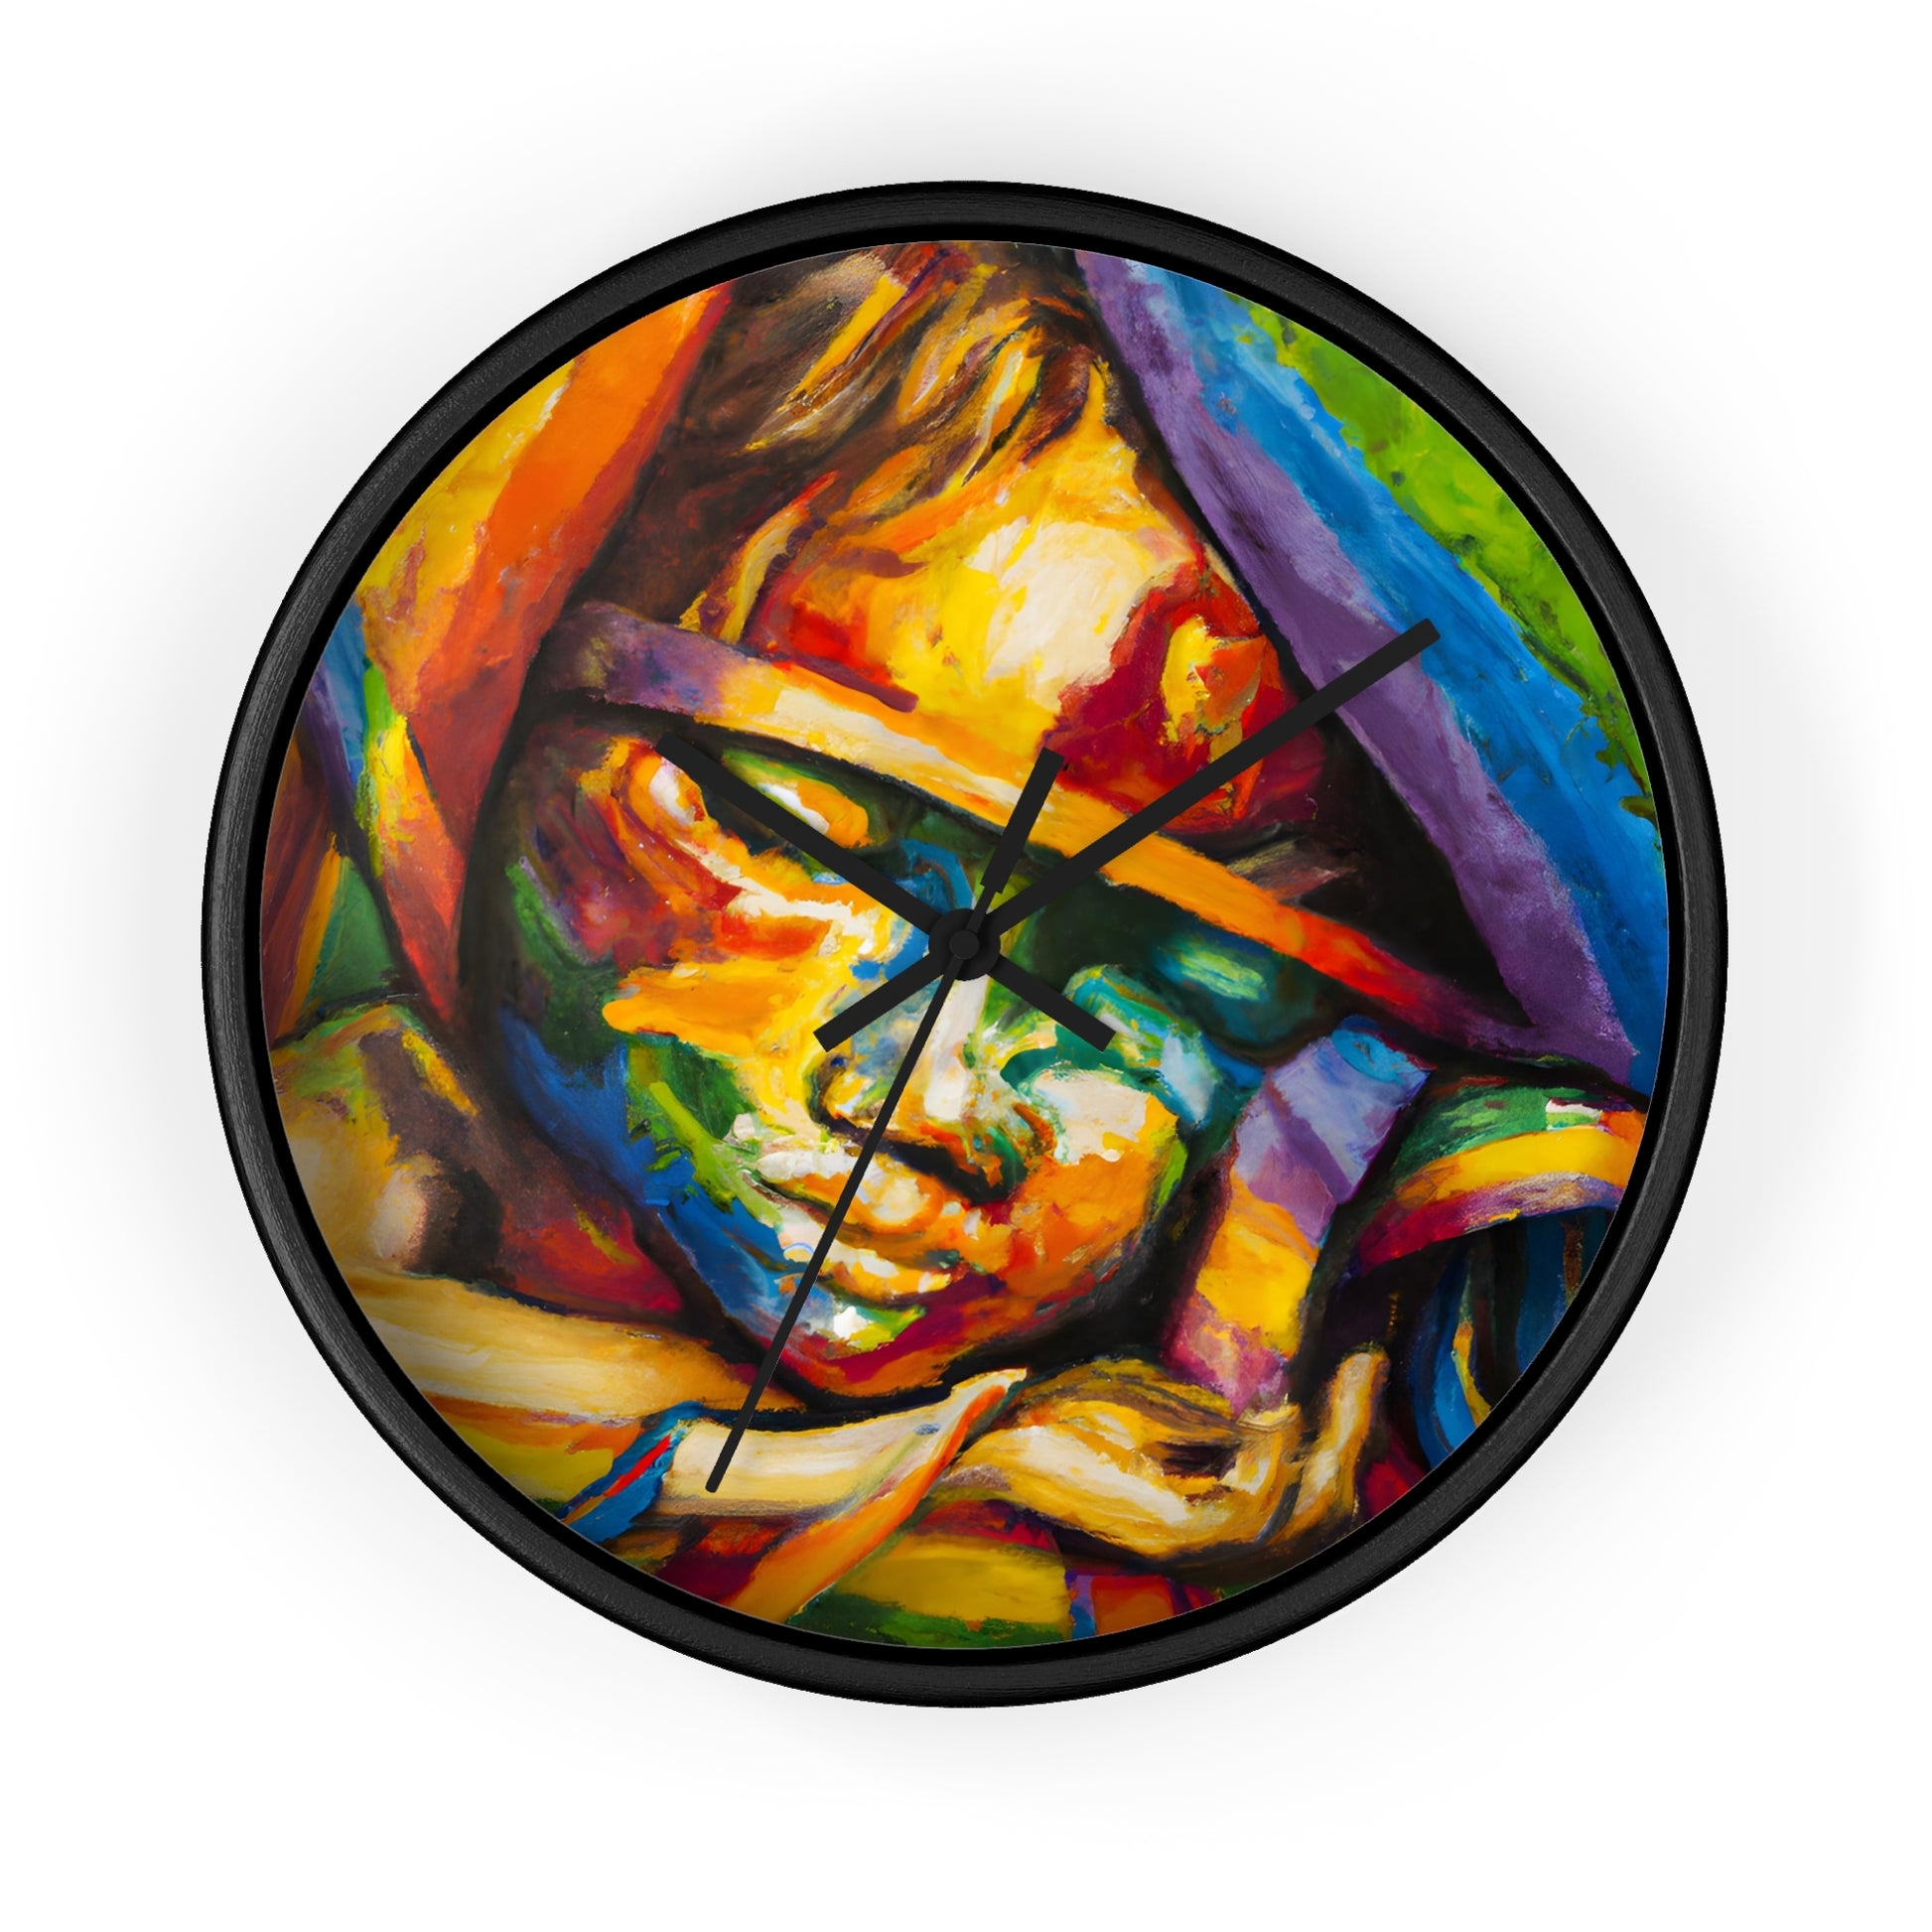 PaintMaster1600 - Autism-Inspired Wall Clock